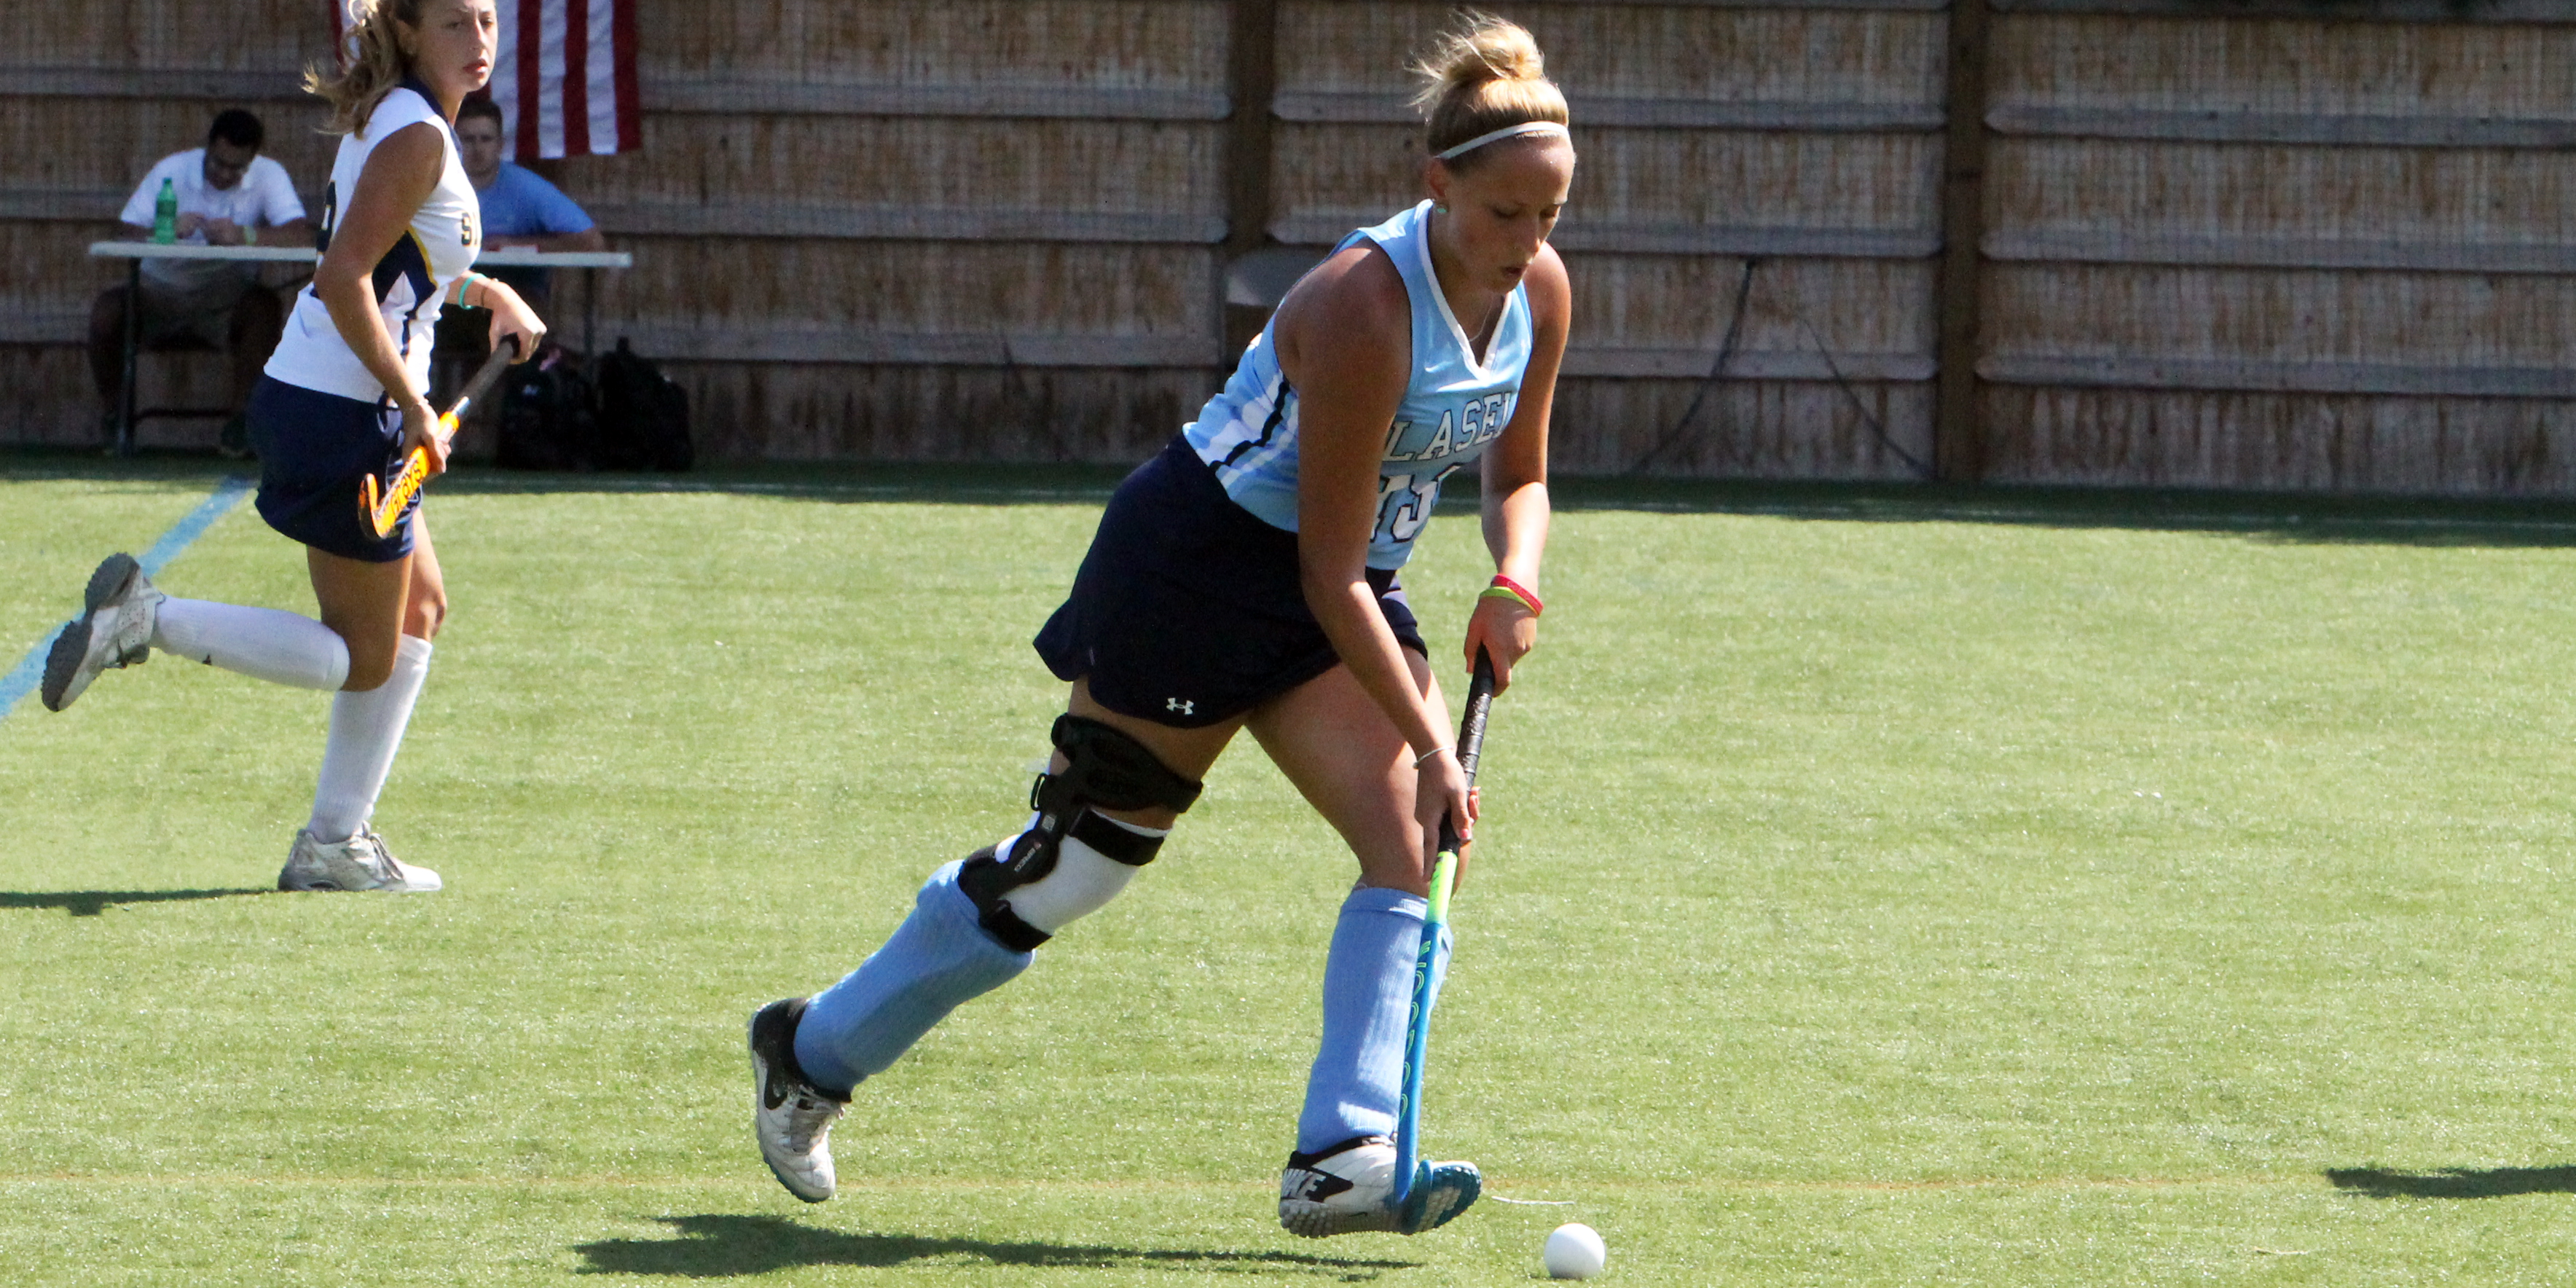 Wilson Nets Overtime Goal to Send Field Hockey Past Simmons 4-3